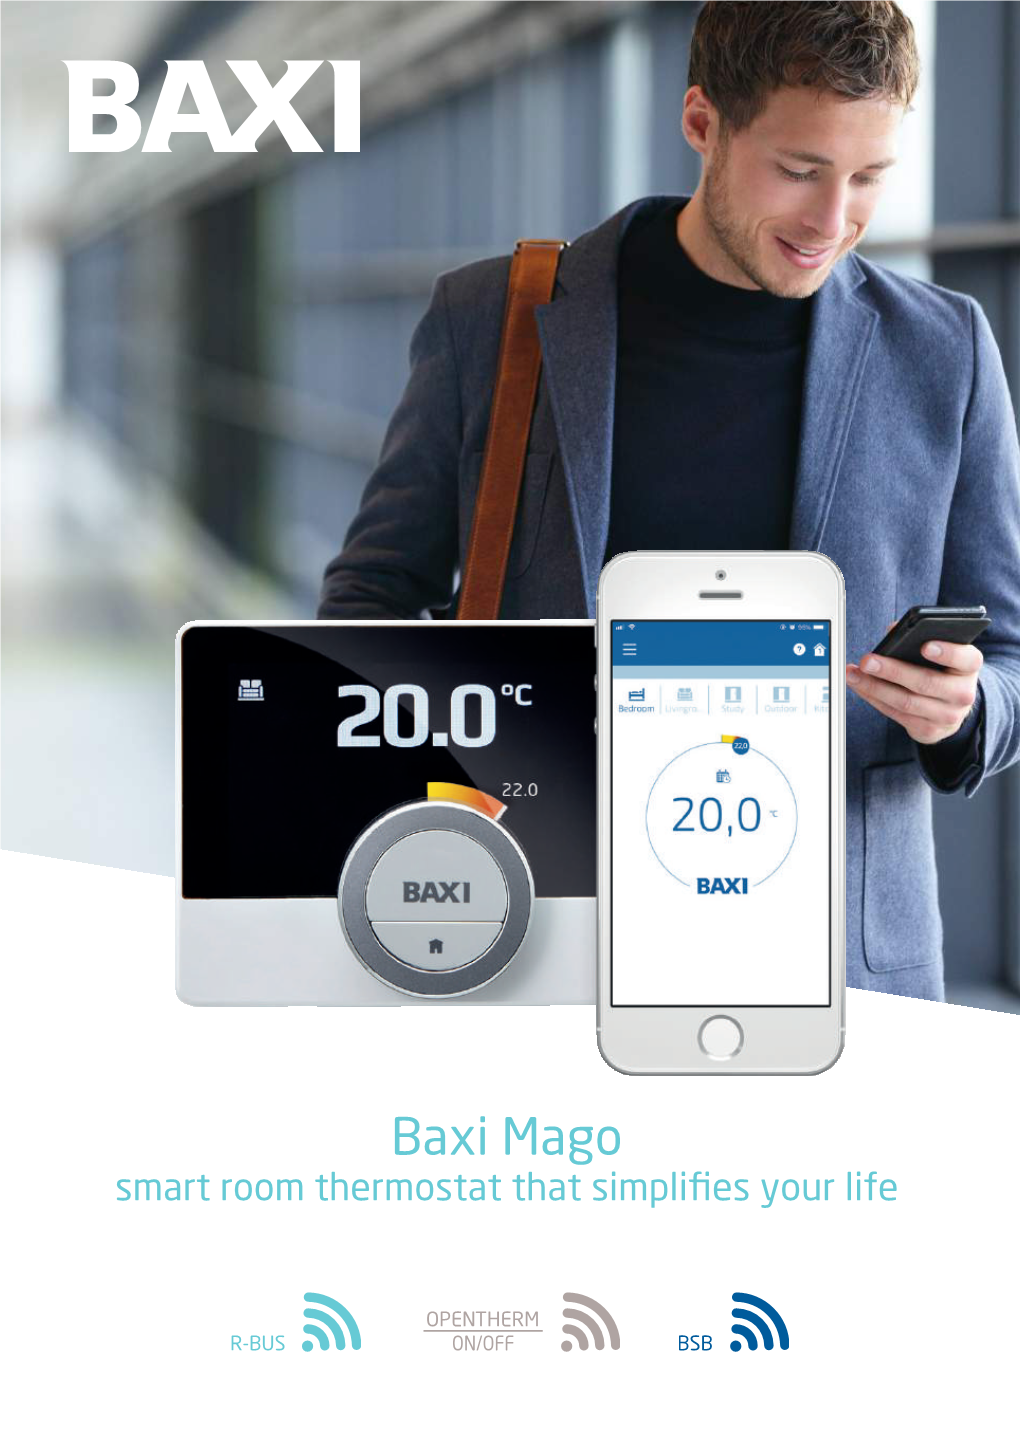 Baxi Mago Smart Room Thermostat That Simplifies Your Life Baxi Mago: the Chronothermostat That Simplifies Your Life